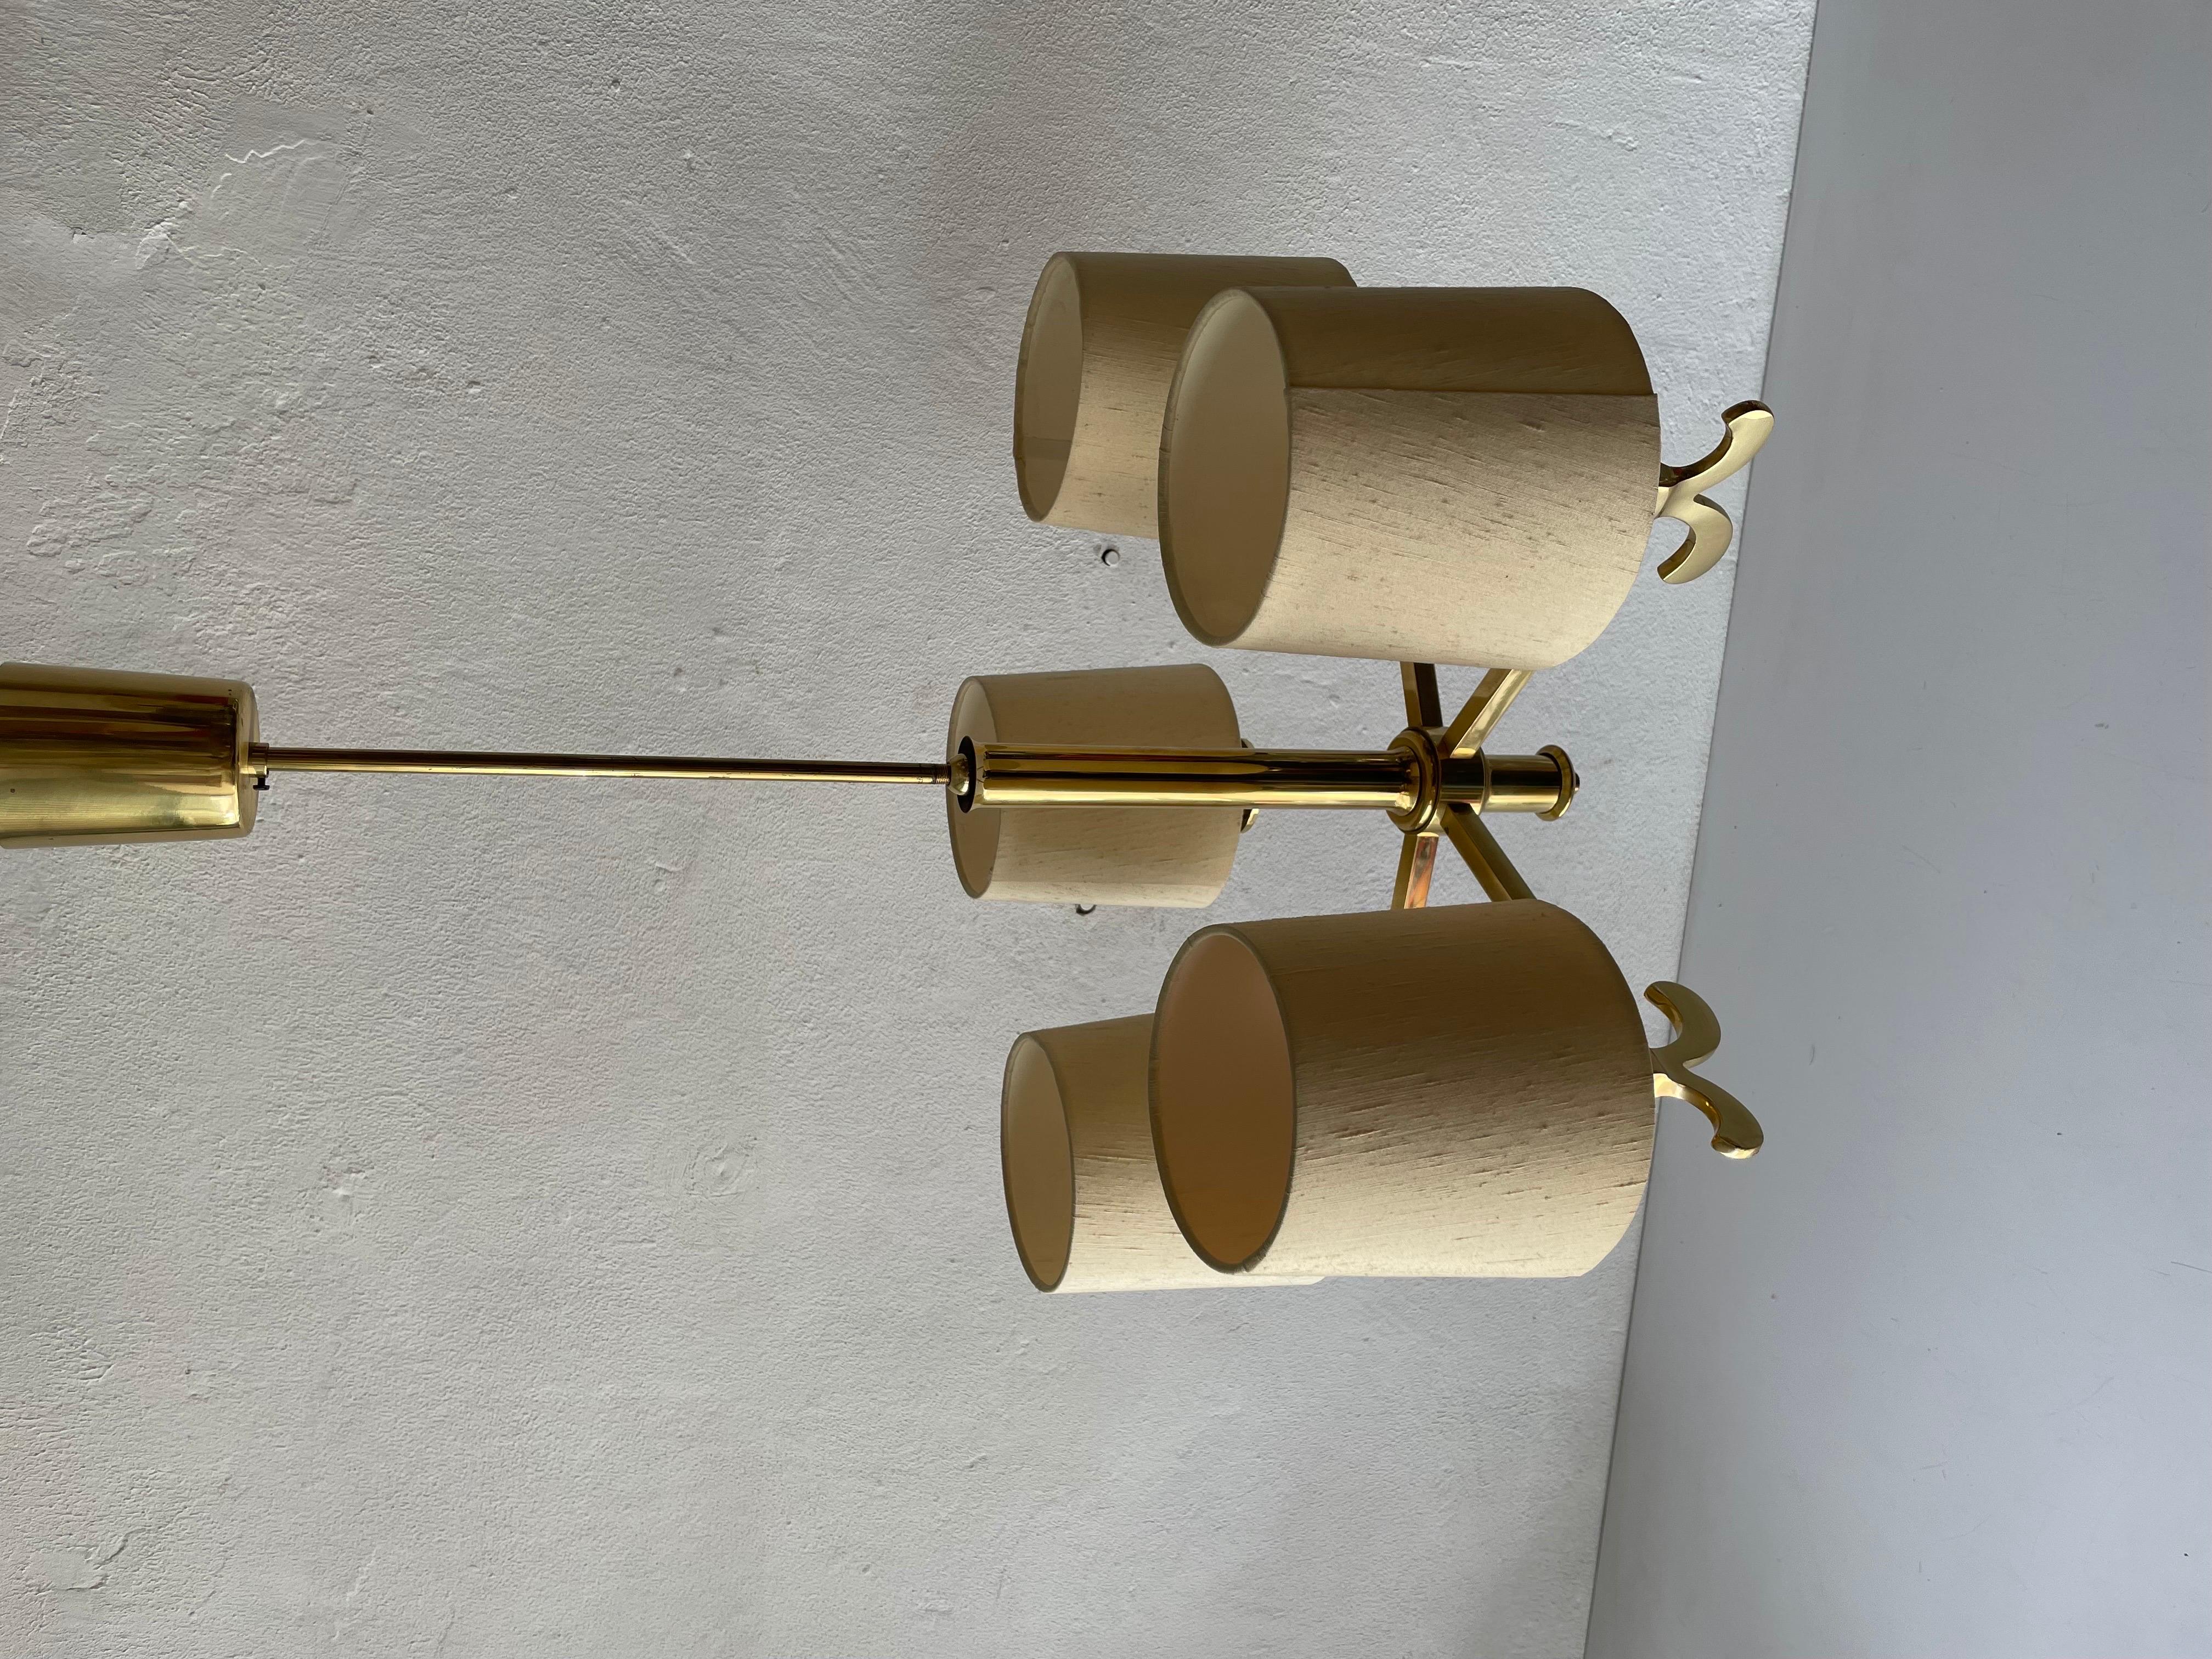 Luxury Design Brass & Fabric Shade 5-arm chandelier by Hans Möller, 1960s, Germany

It is very ideal and suitable for all living areas.

Lamp is in good condition. No damage, no crack.
Wear consistent with age and use.

This lamp works with